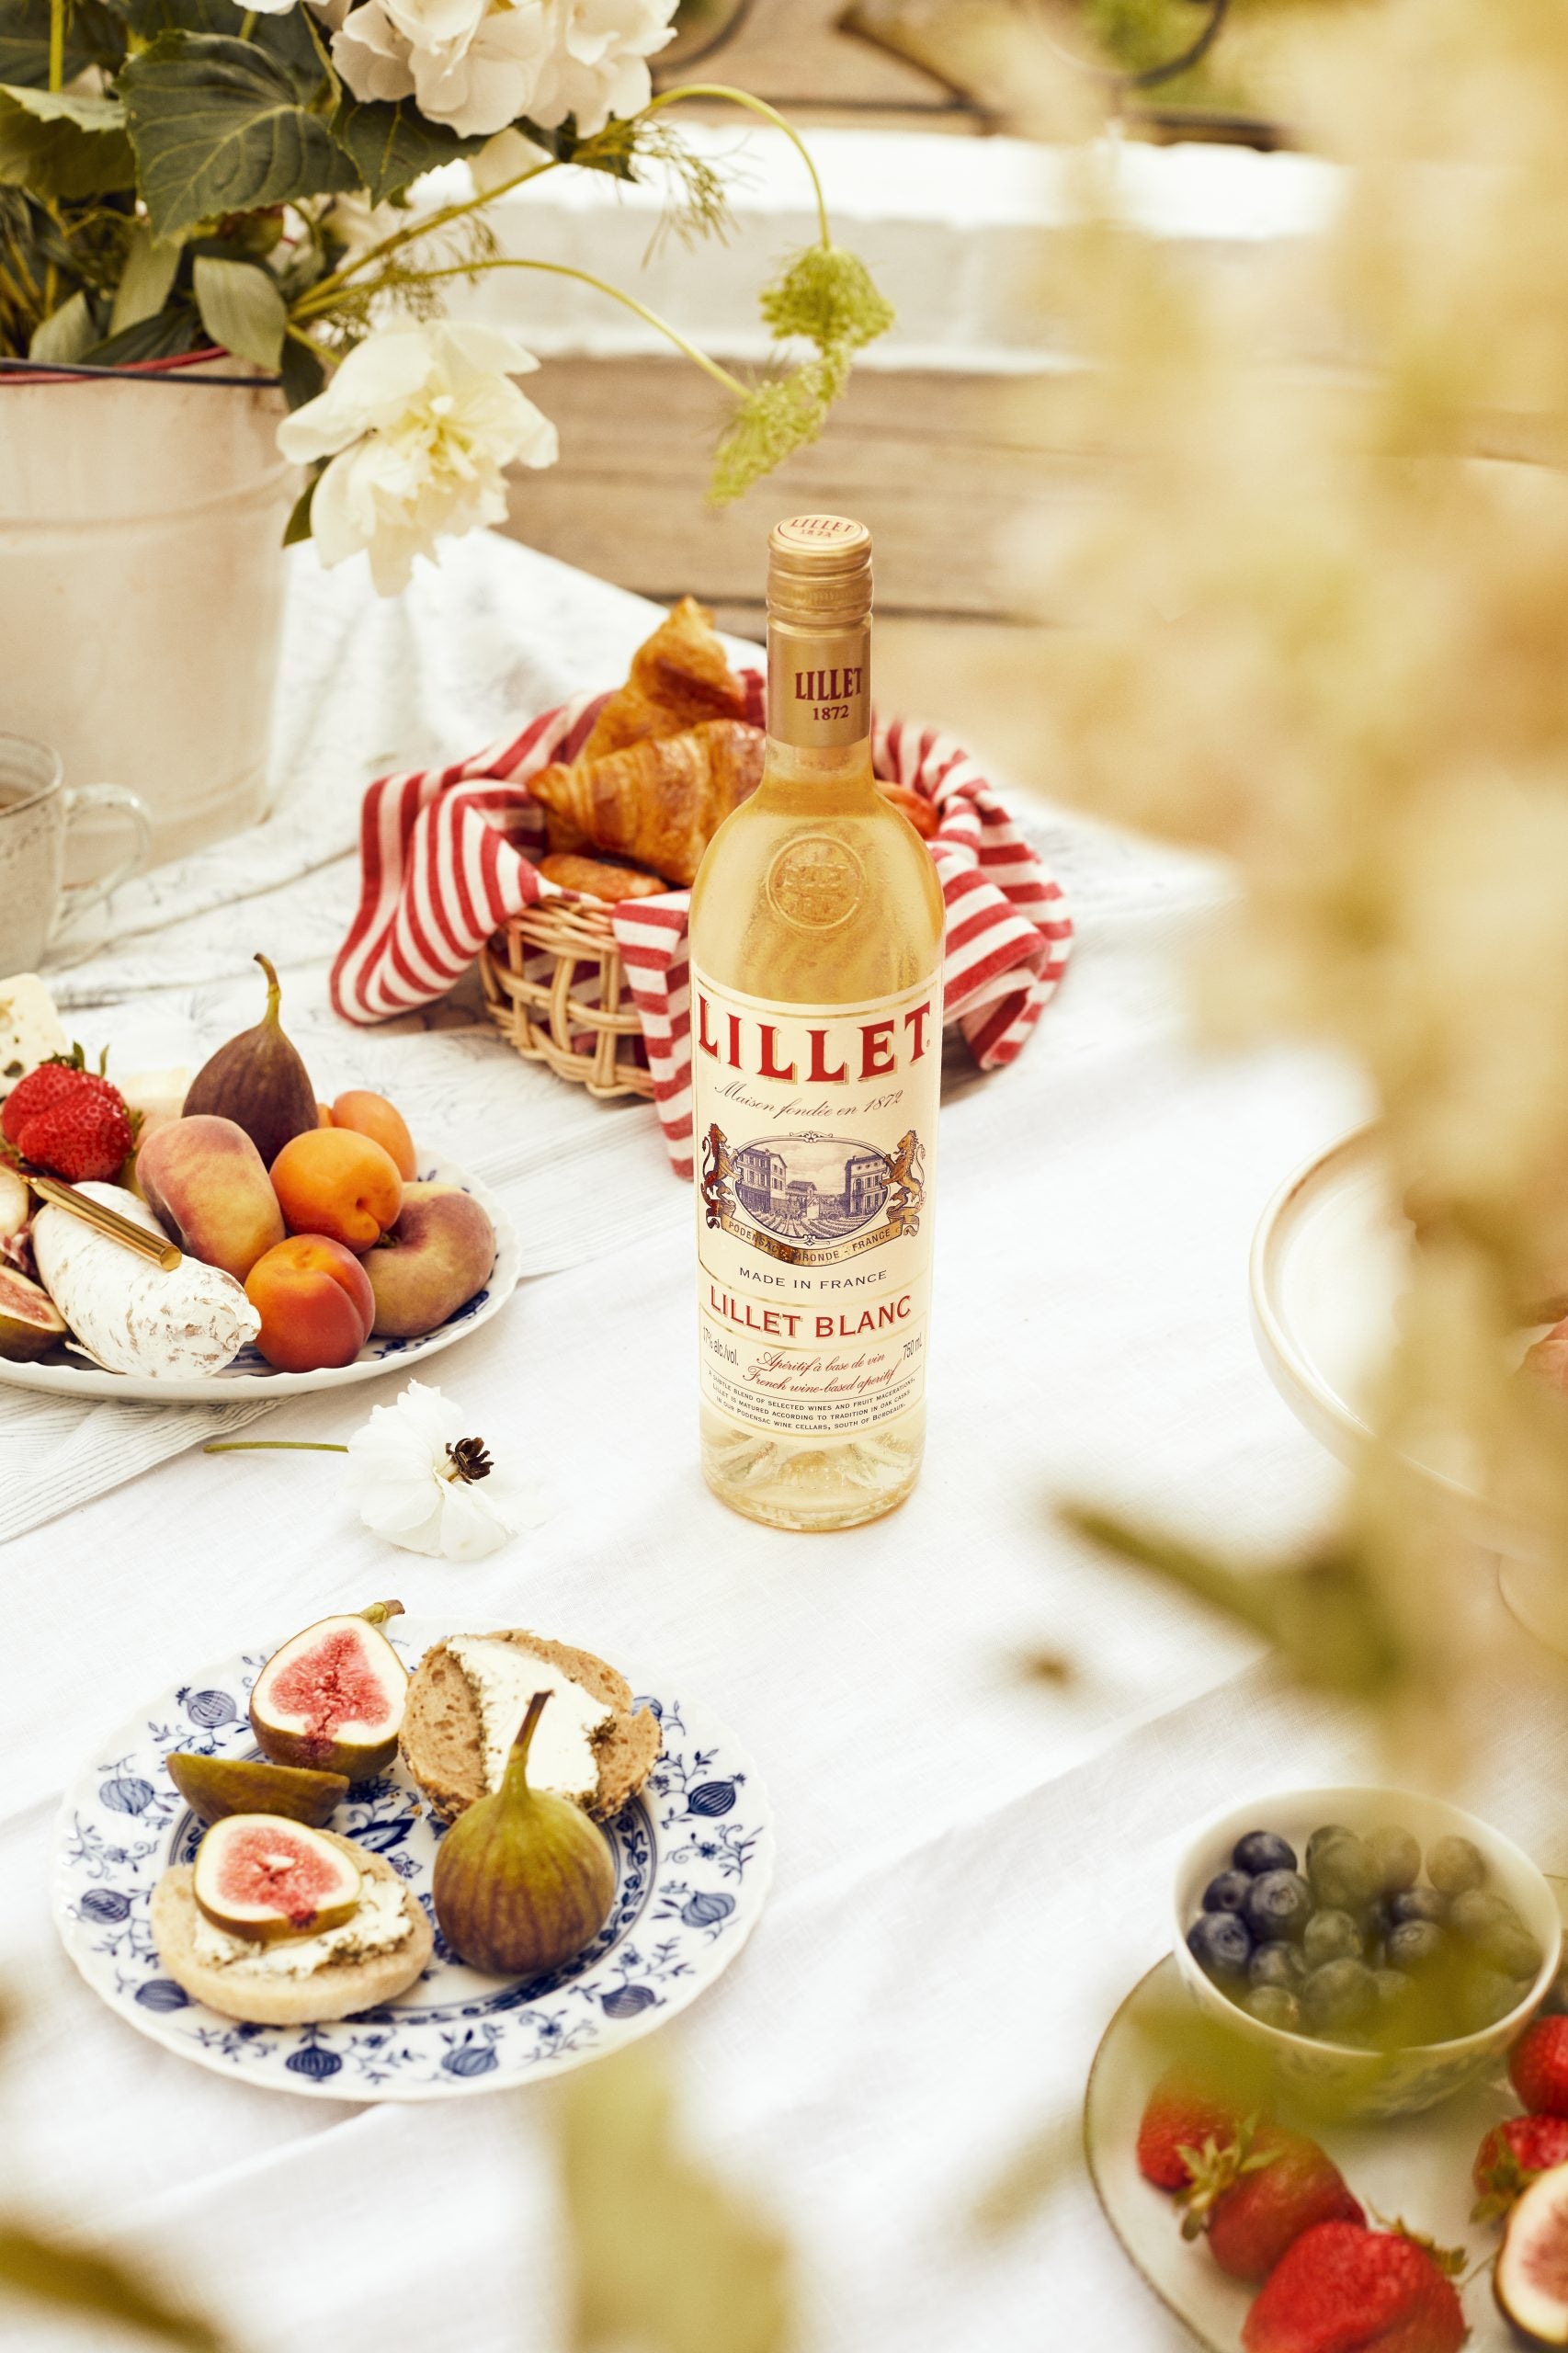 Lillet Blanc product